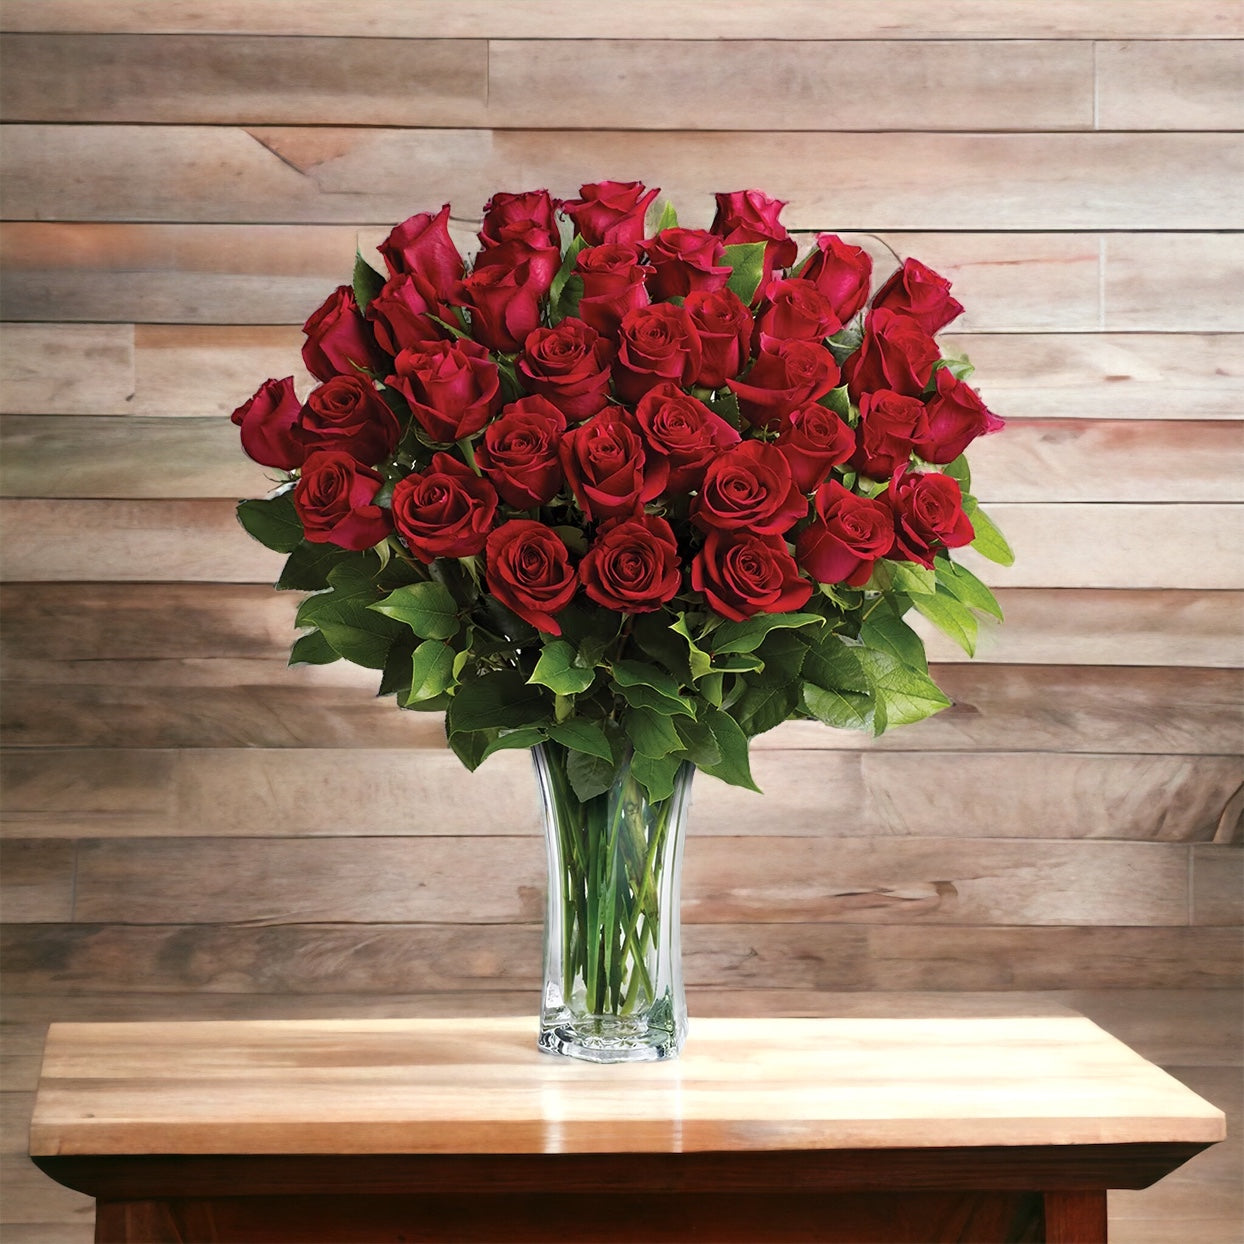 Thirty-six roses in a glass vase